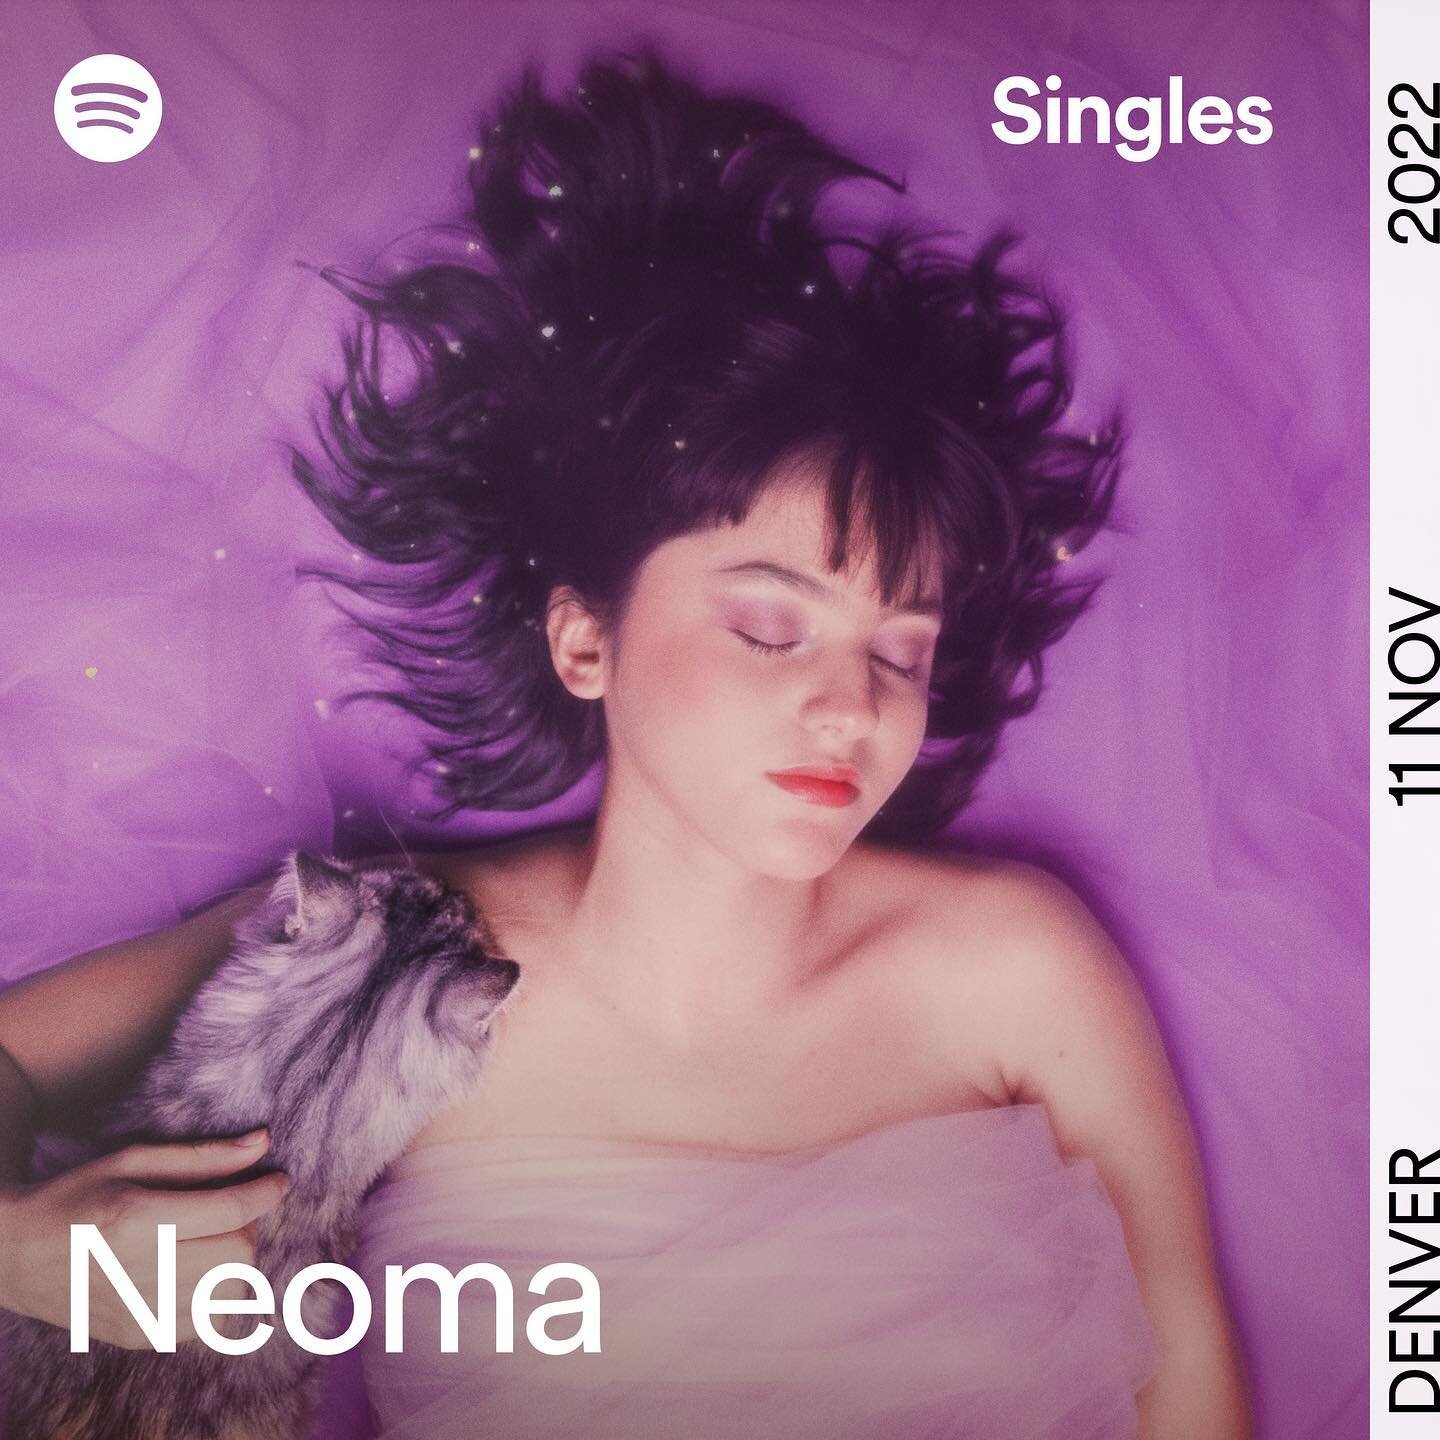 Neoma&rsquo;s cover of Kate Bush &ldquo;Running Up That Hill&rdquo; is out now! This shoot was so wholesome &amp; fun, thank you to @dj.ganso @dani_ela_paez &amp; @gabrielapaeze for assisting with lighting, cat treats (shoutout @inaba_churu) &amp; fi